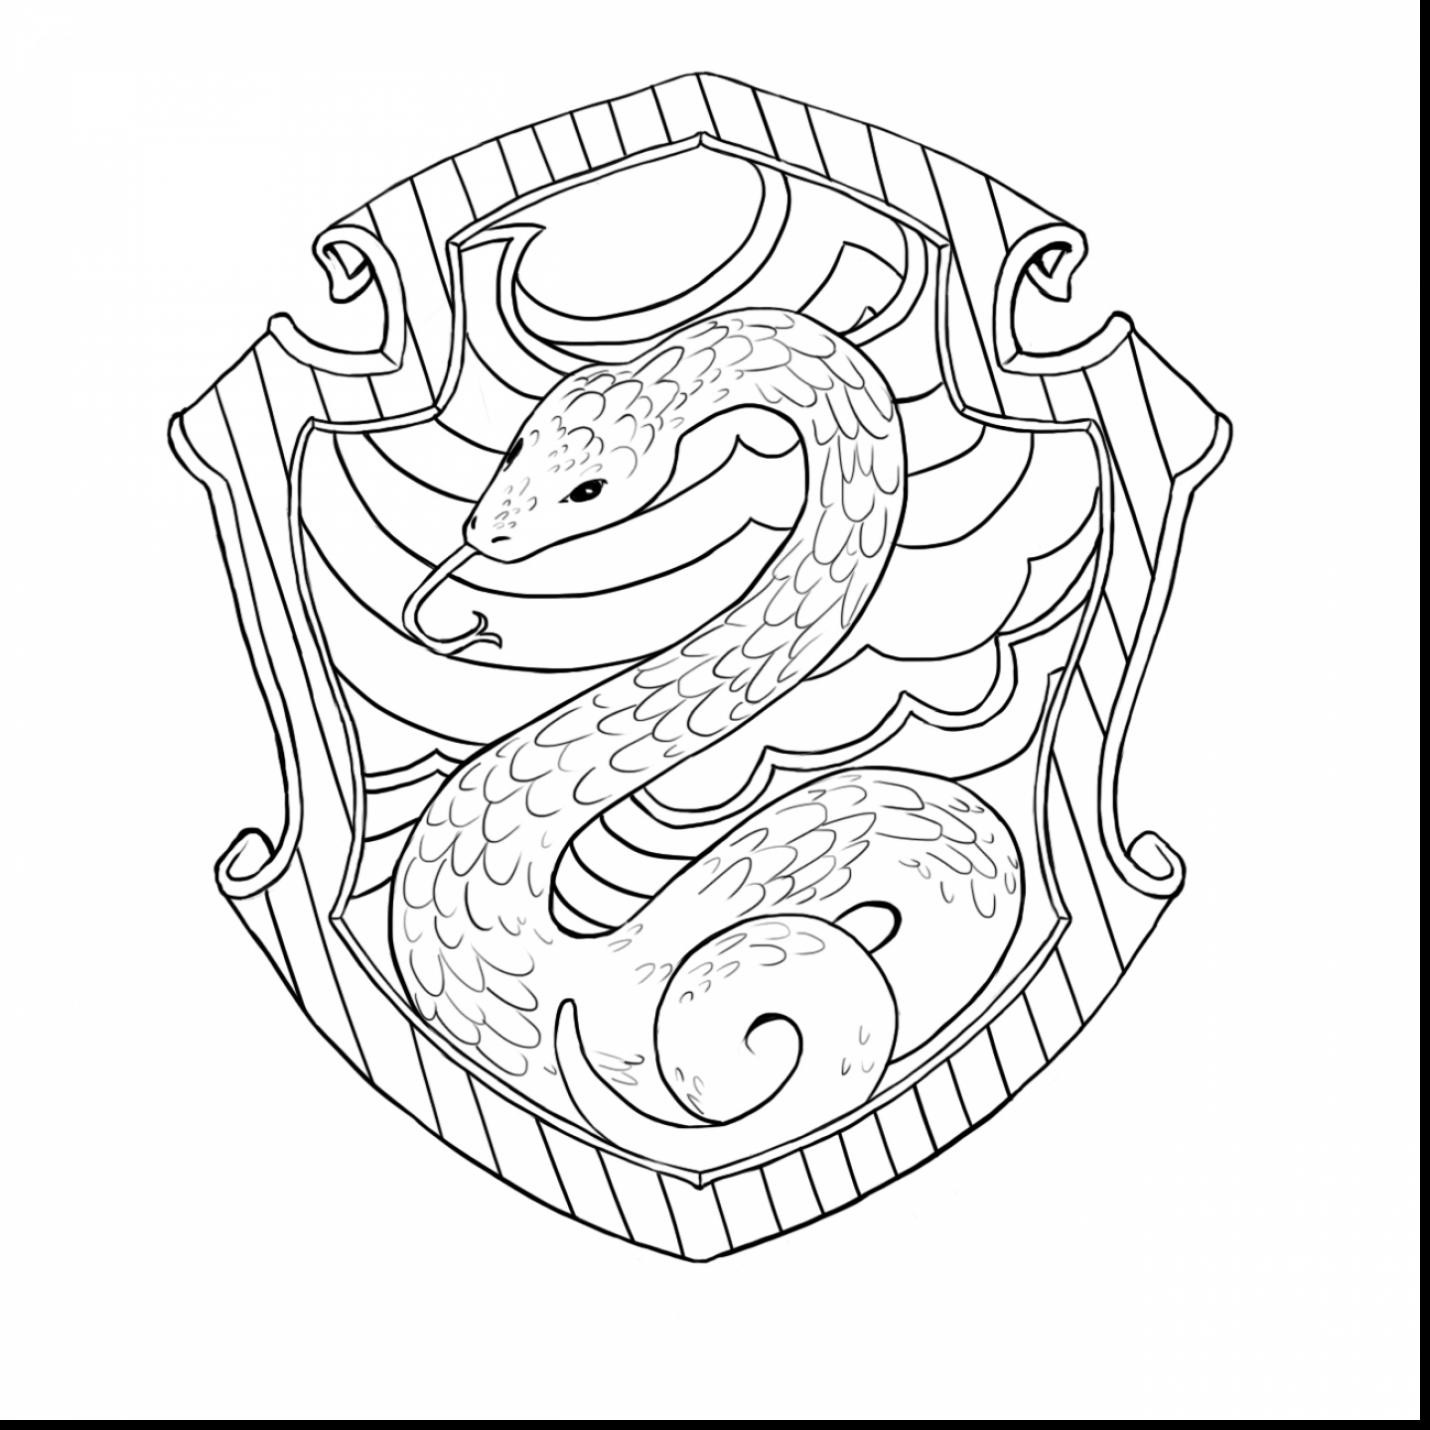 Harry Potter Hogwarts Coloring Pages at GetColorings.com | Free